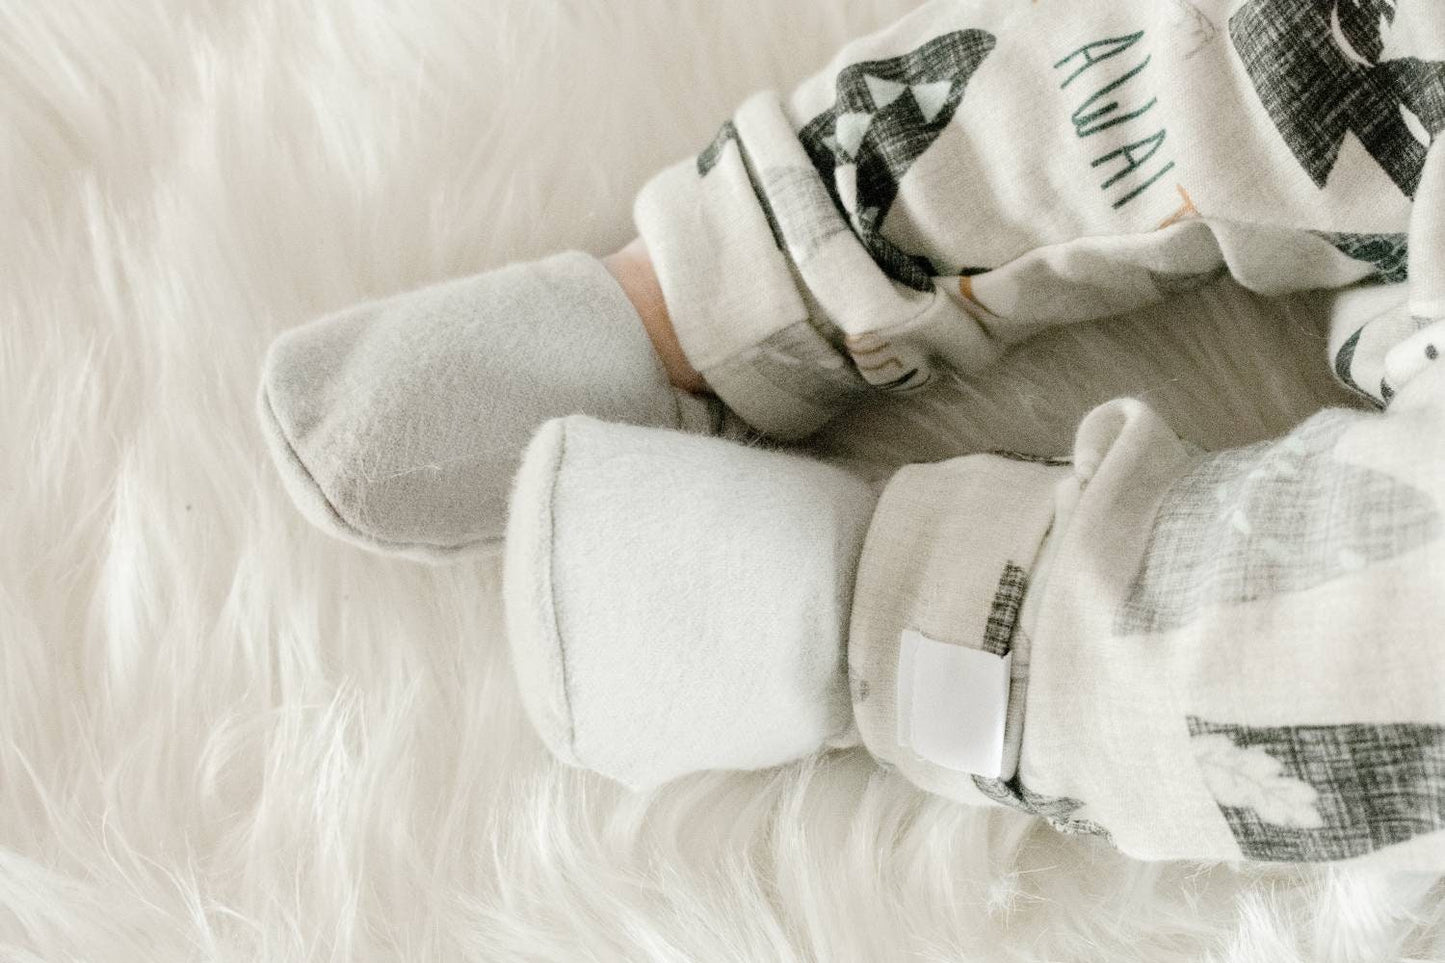 Grey Baby Booties, Baby Gifts, Gray Baby Crib Shoes, Grey Baby Moccs, Gray Baby Shoes, Grey Baby Shoes, Grey Baby Slippers, Gray Slippers